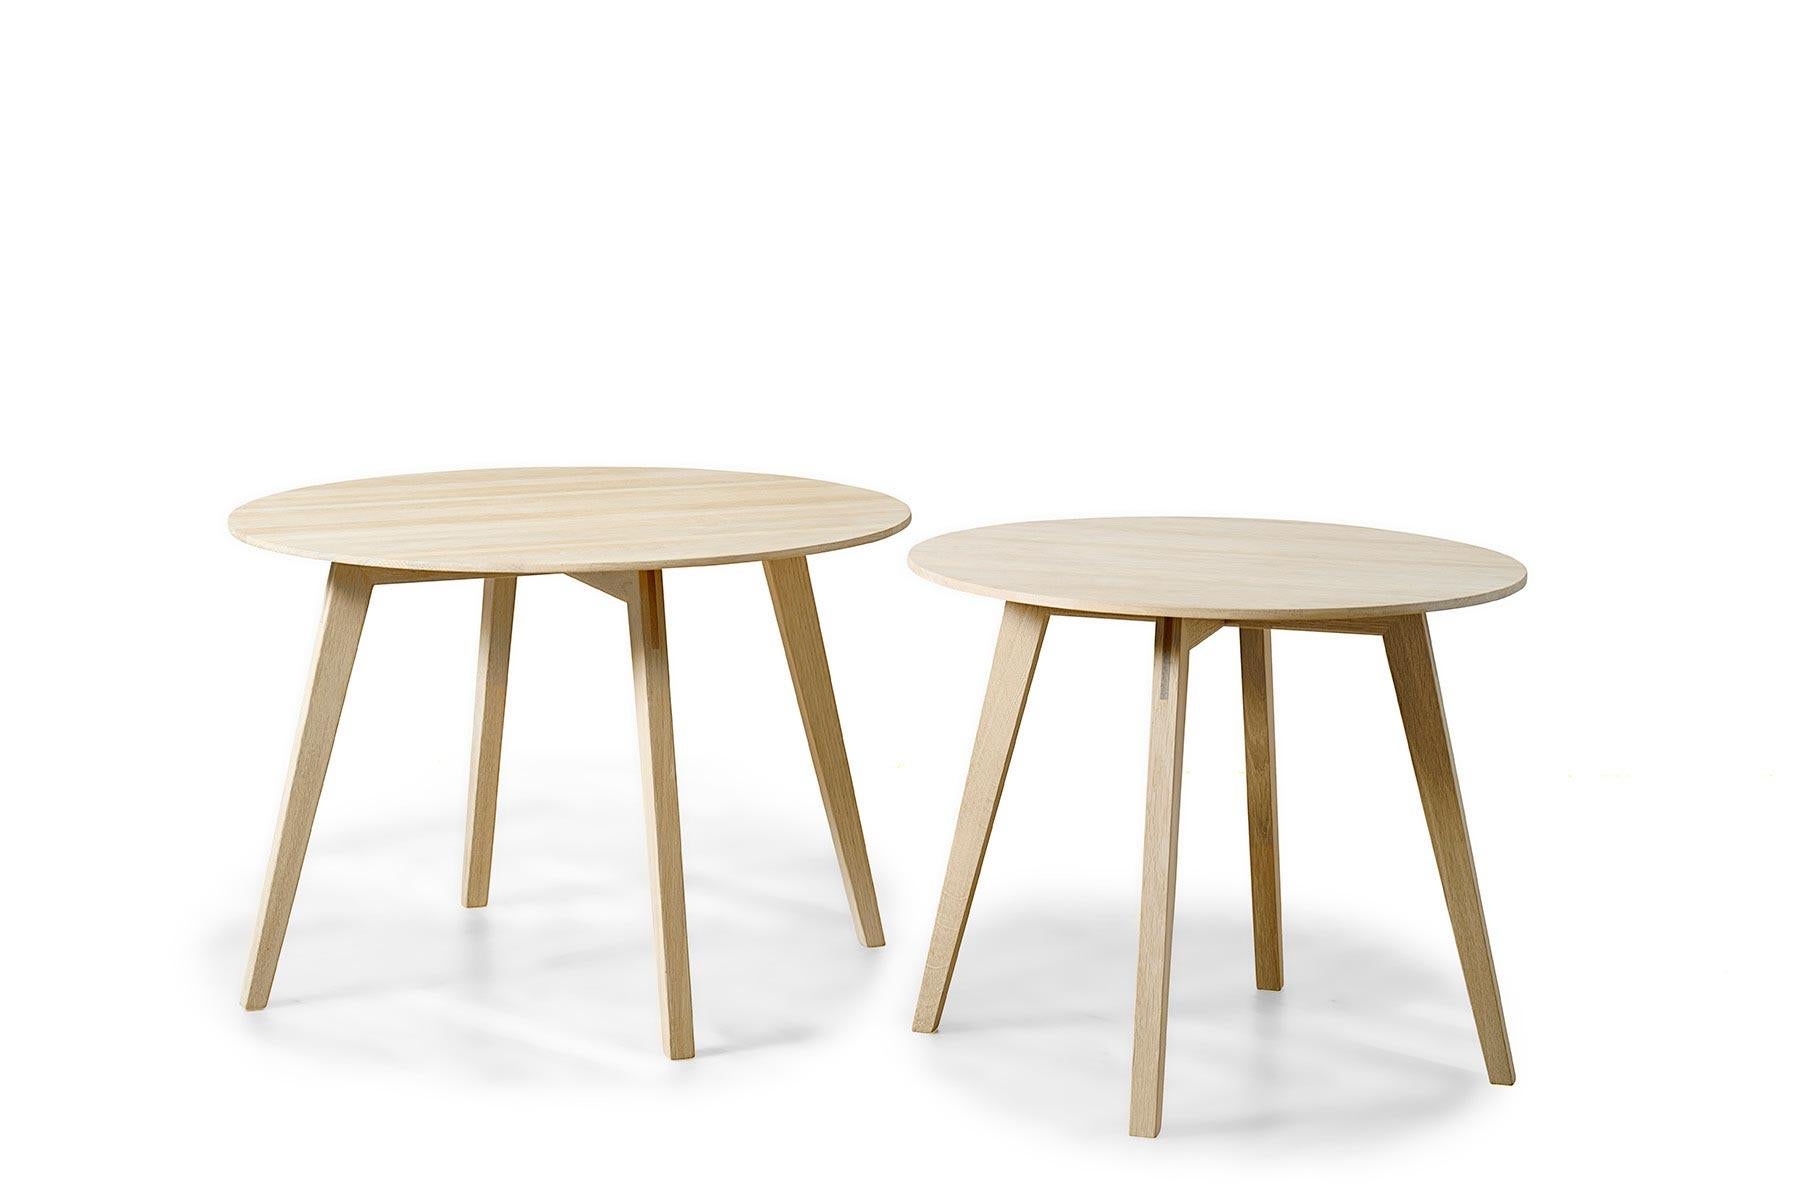 Designed by Blum and Balle for GETAMA in 2012, this side table known as the circle features unparalleled craftsmanship in a Minimalist Silhouette. Flawless joinery throughout. This piece is hand built at GETAMA’s factory in Gedsted, Denmark by